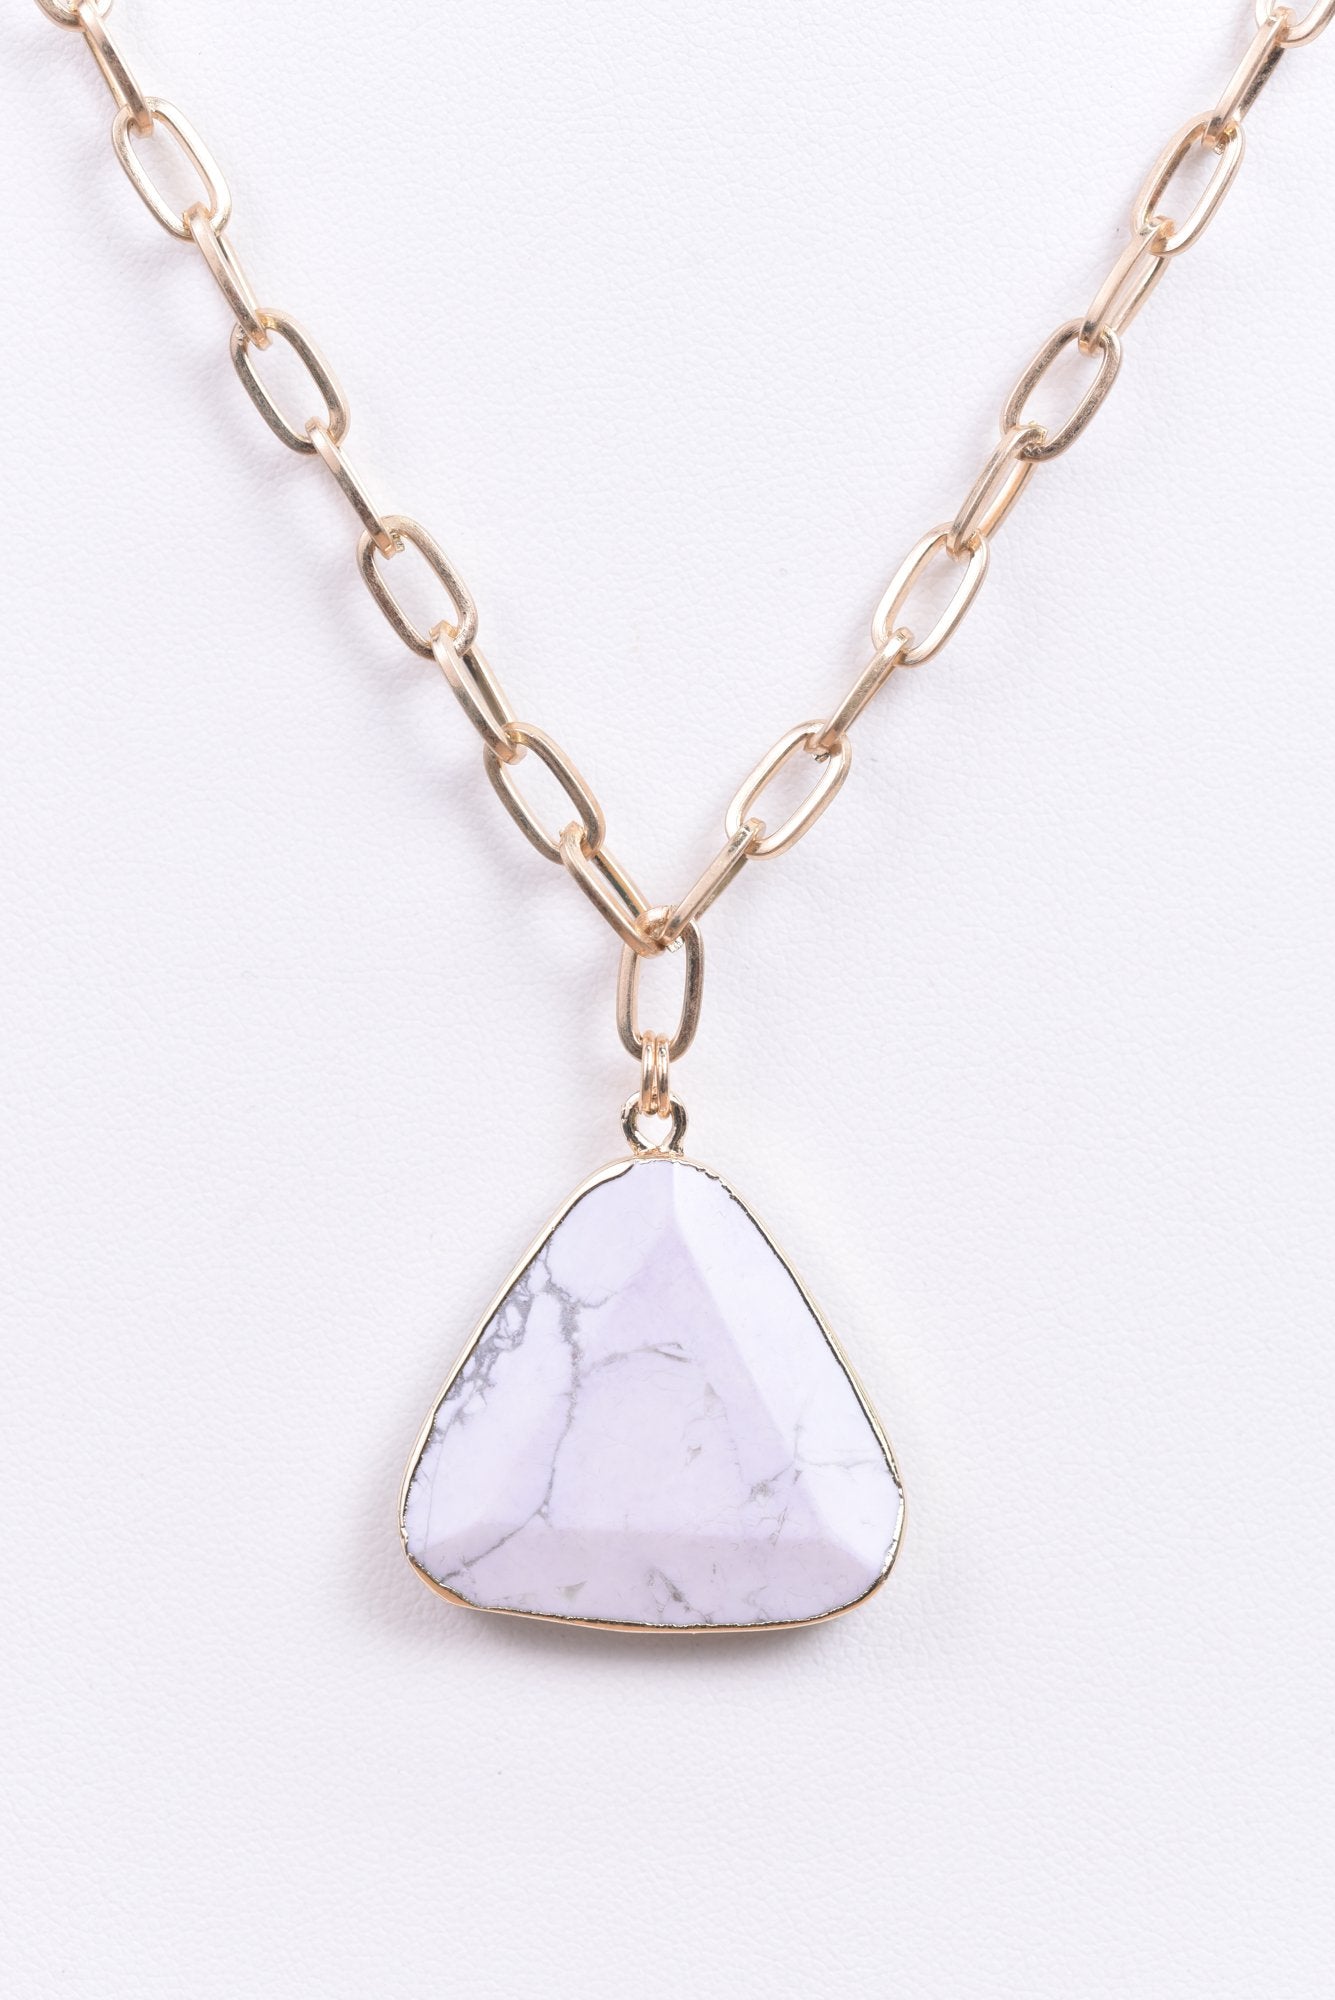 White/Gray/Gold/Marble Stone/Triangle Pendant Necklace - NEK3955WH